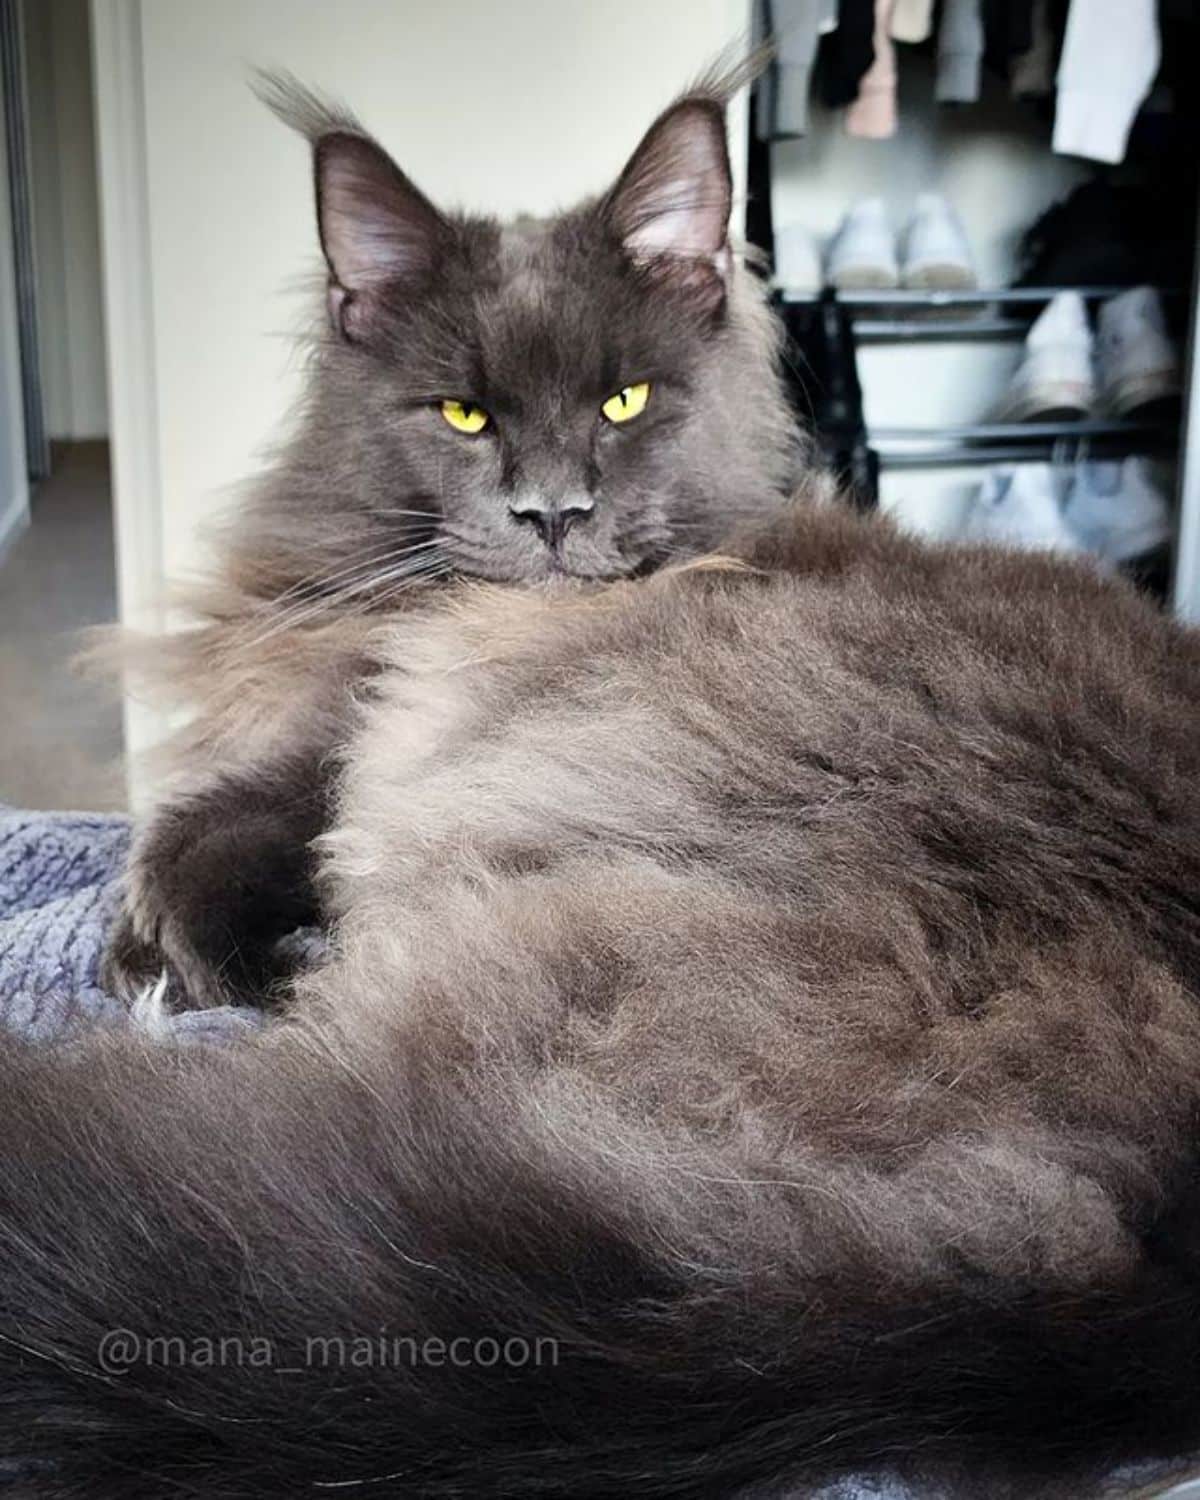 A fluffy gray maine coon with yellow eyes lying on a bed.